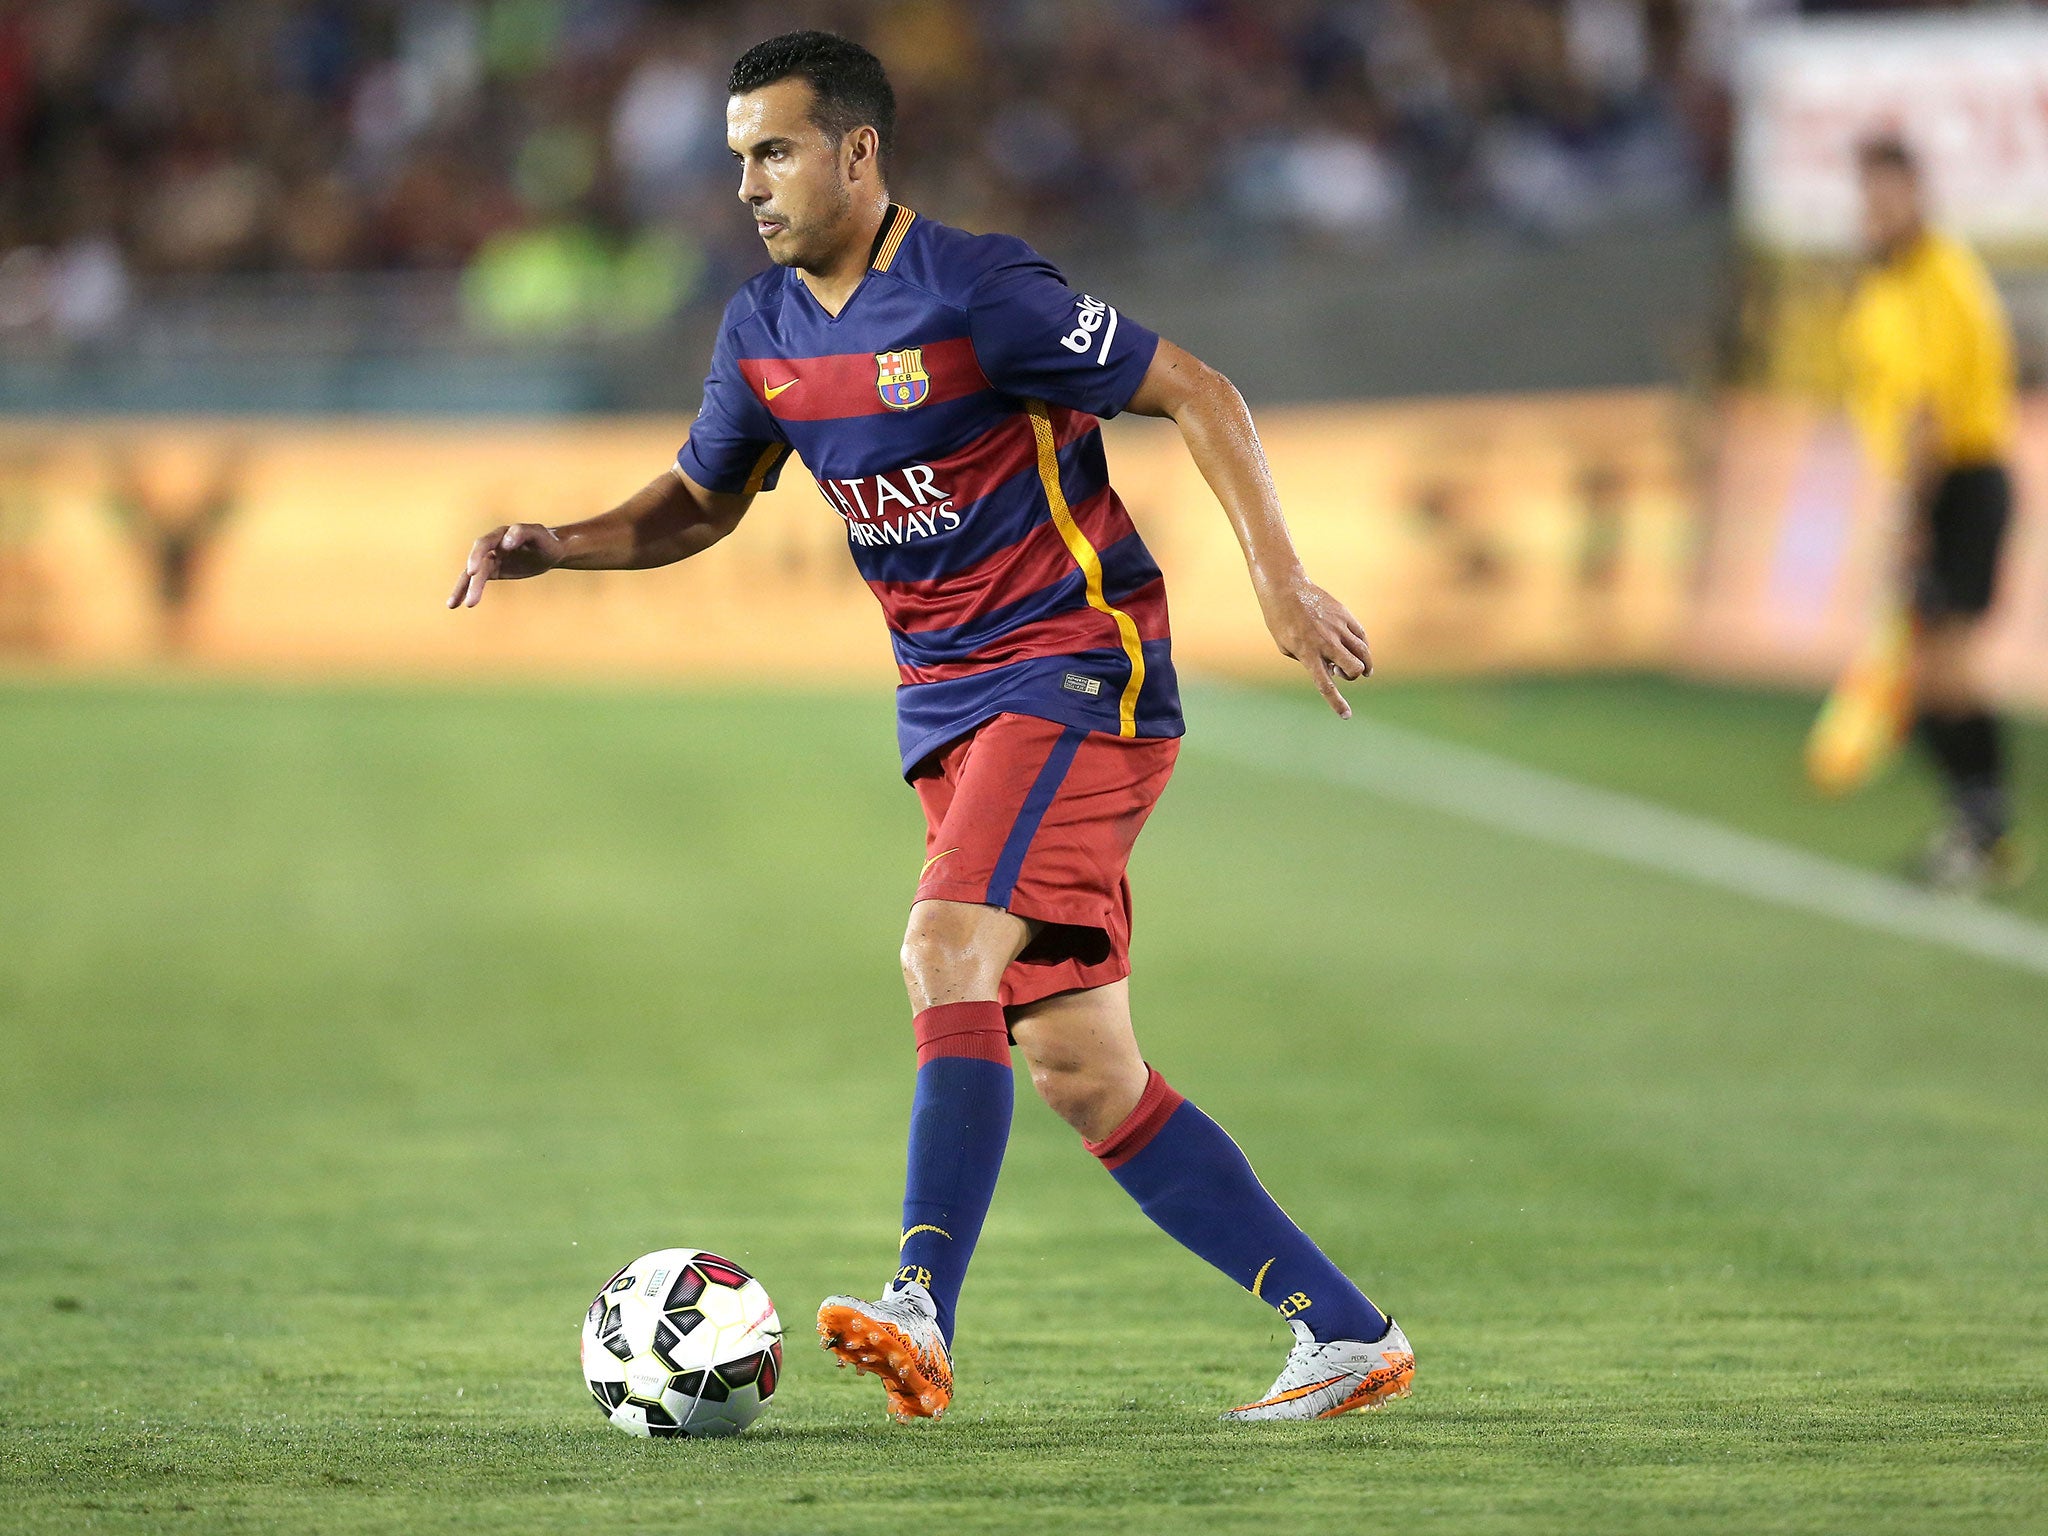 Pedro has been linked with a move to Manchester United